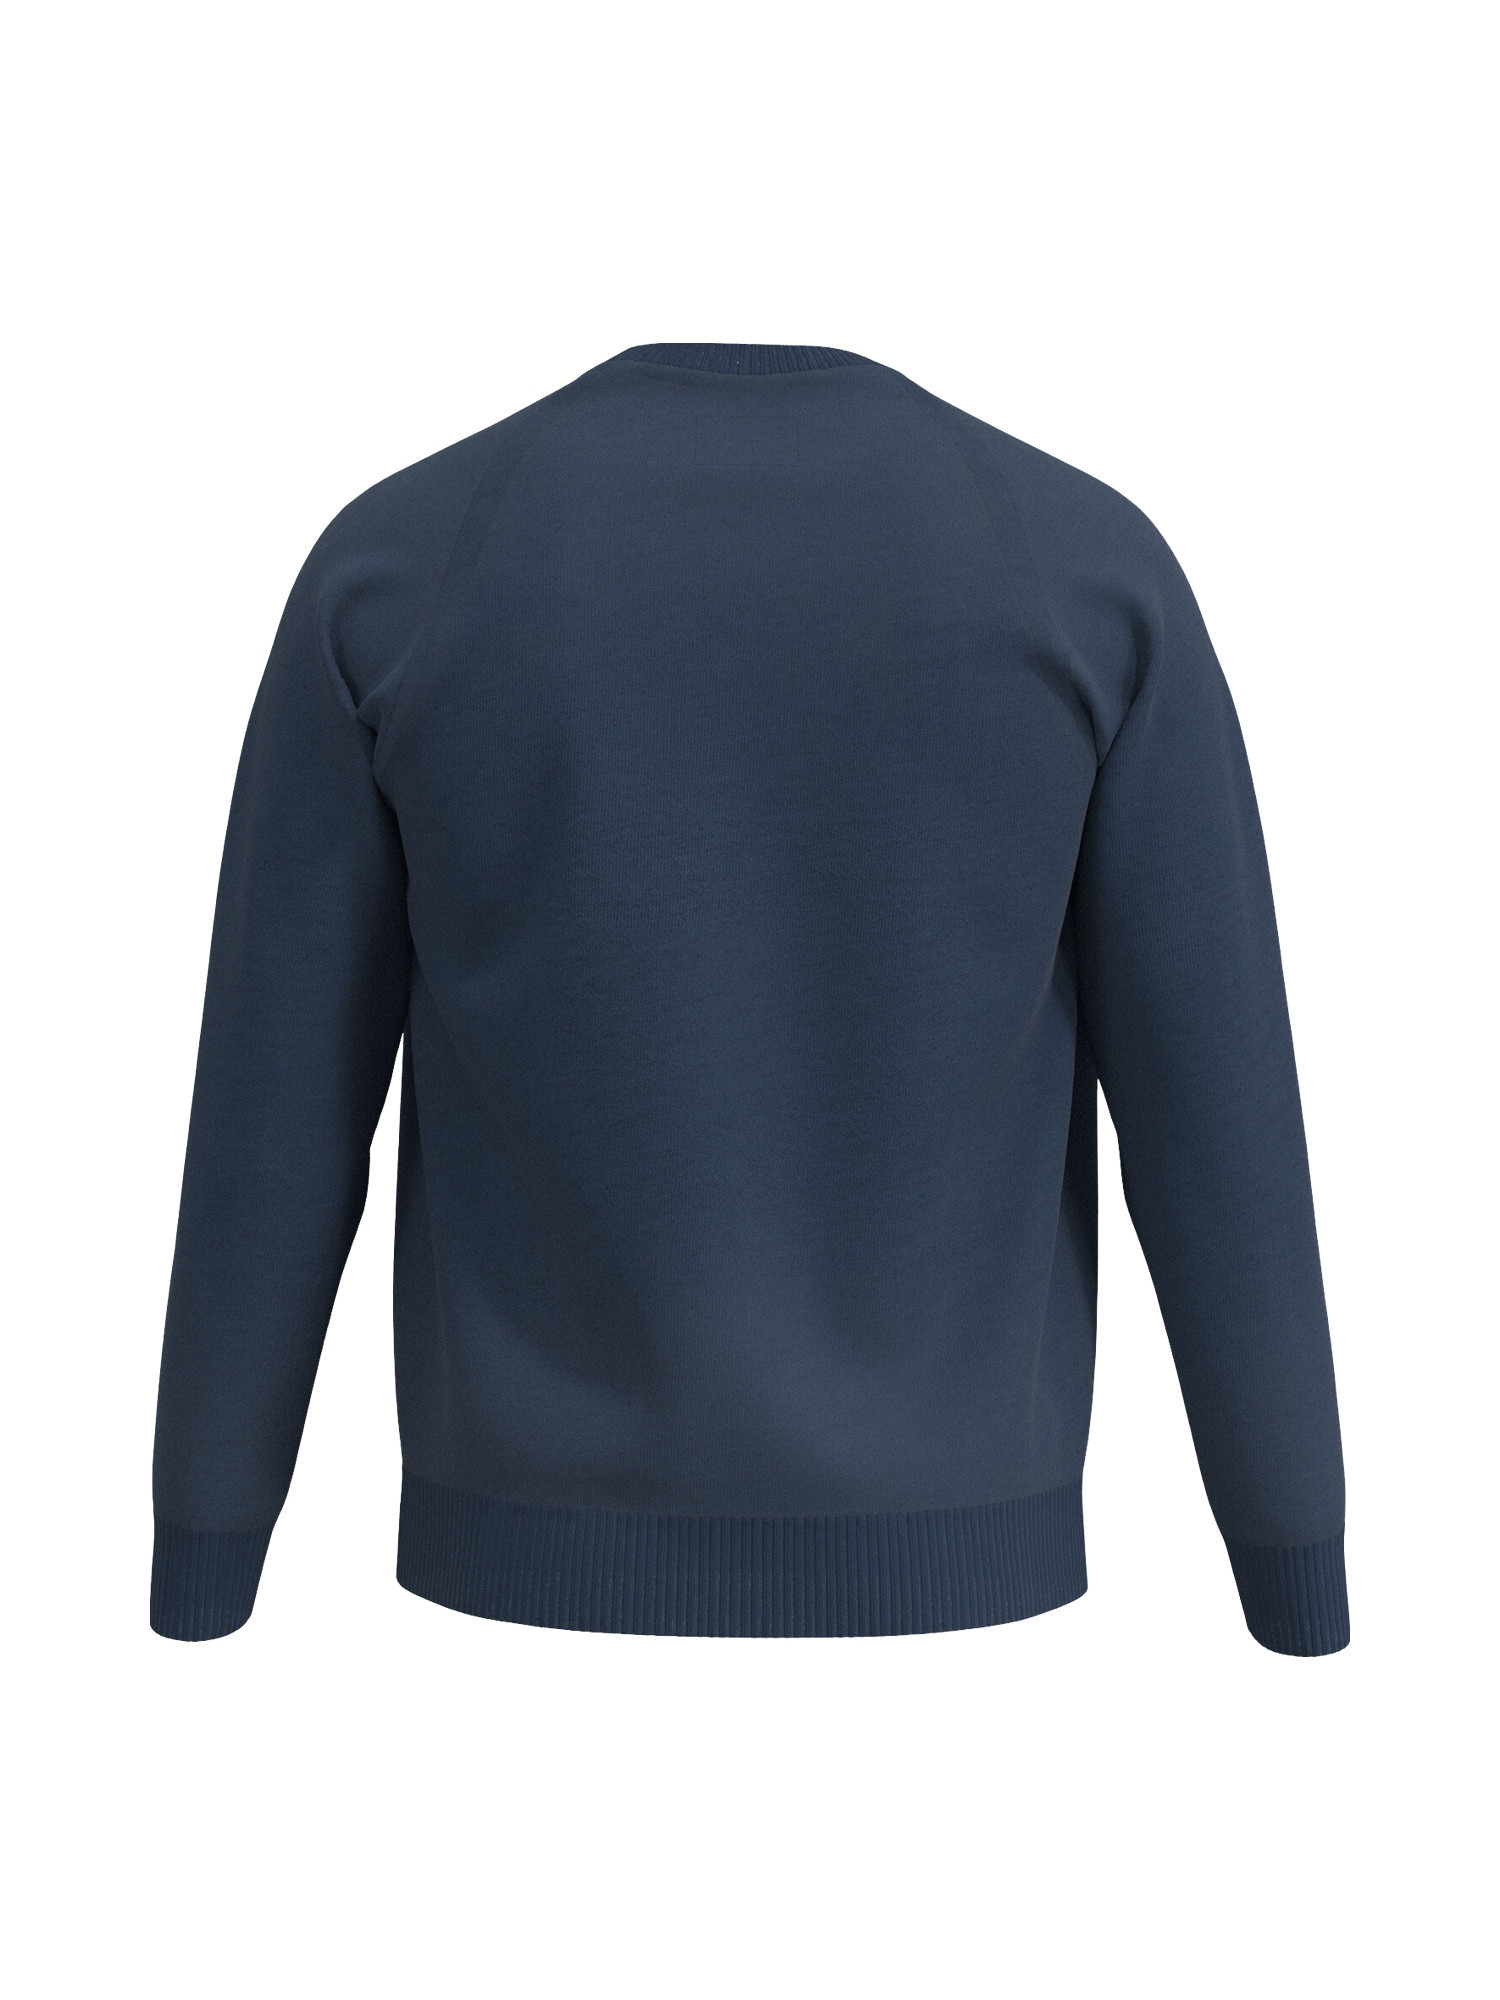 Pepe Jeans - Pullover girocollo in cotone, Blu scuro, large image number 1